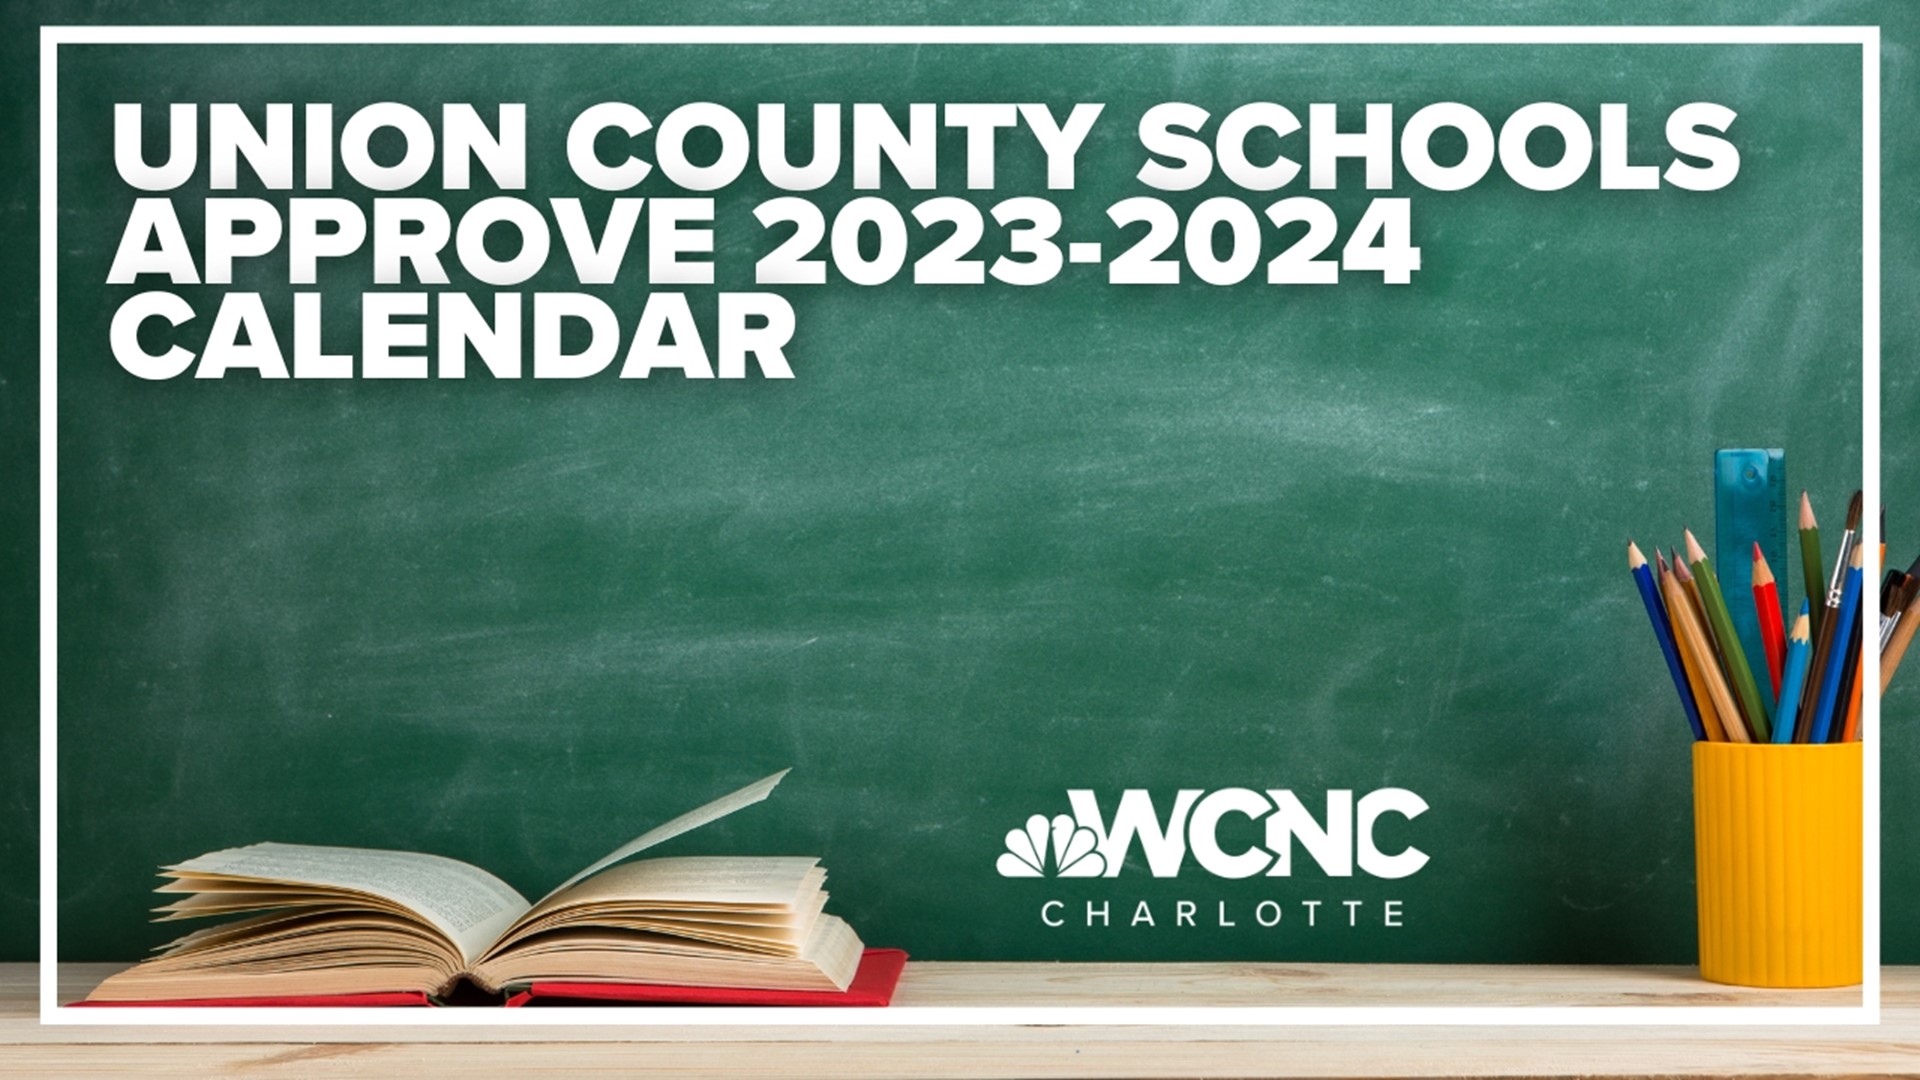 The Board of Education voted unanimously to start the 2023-24 school year earlier.